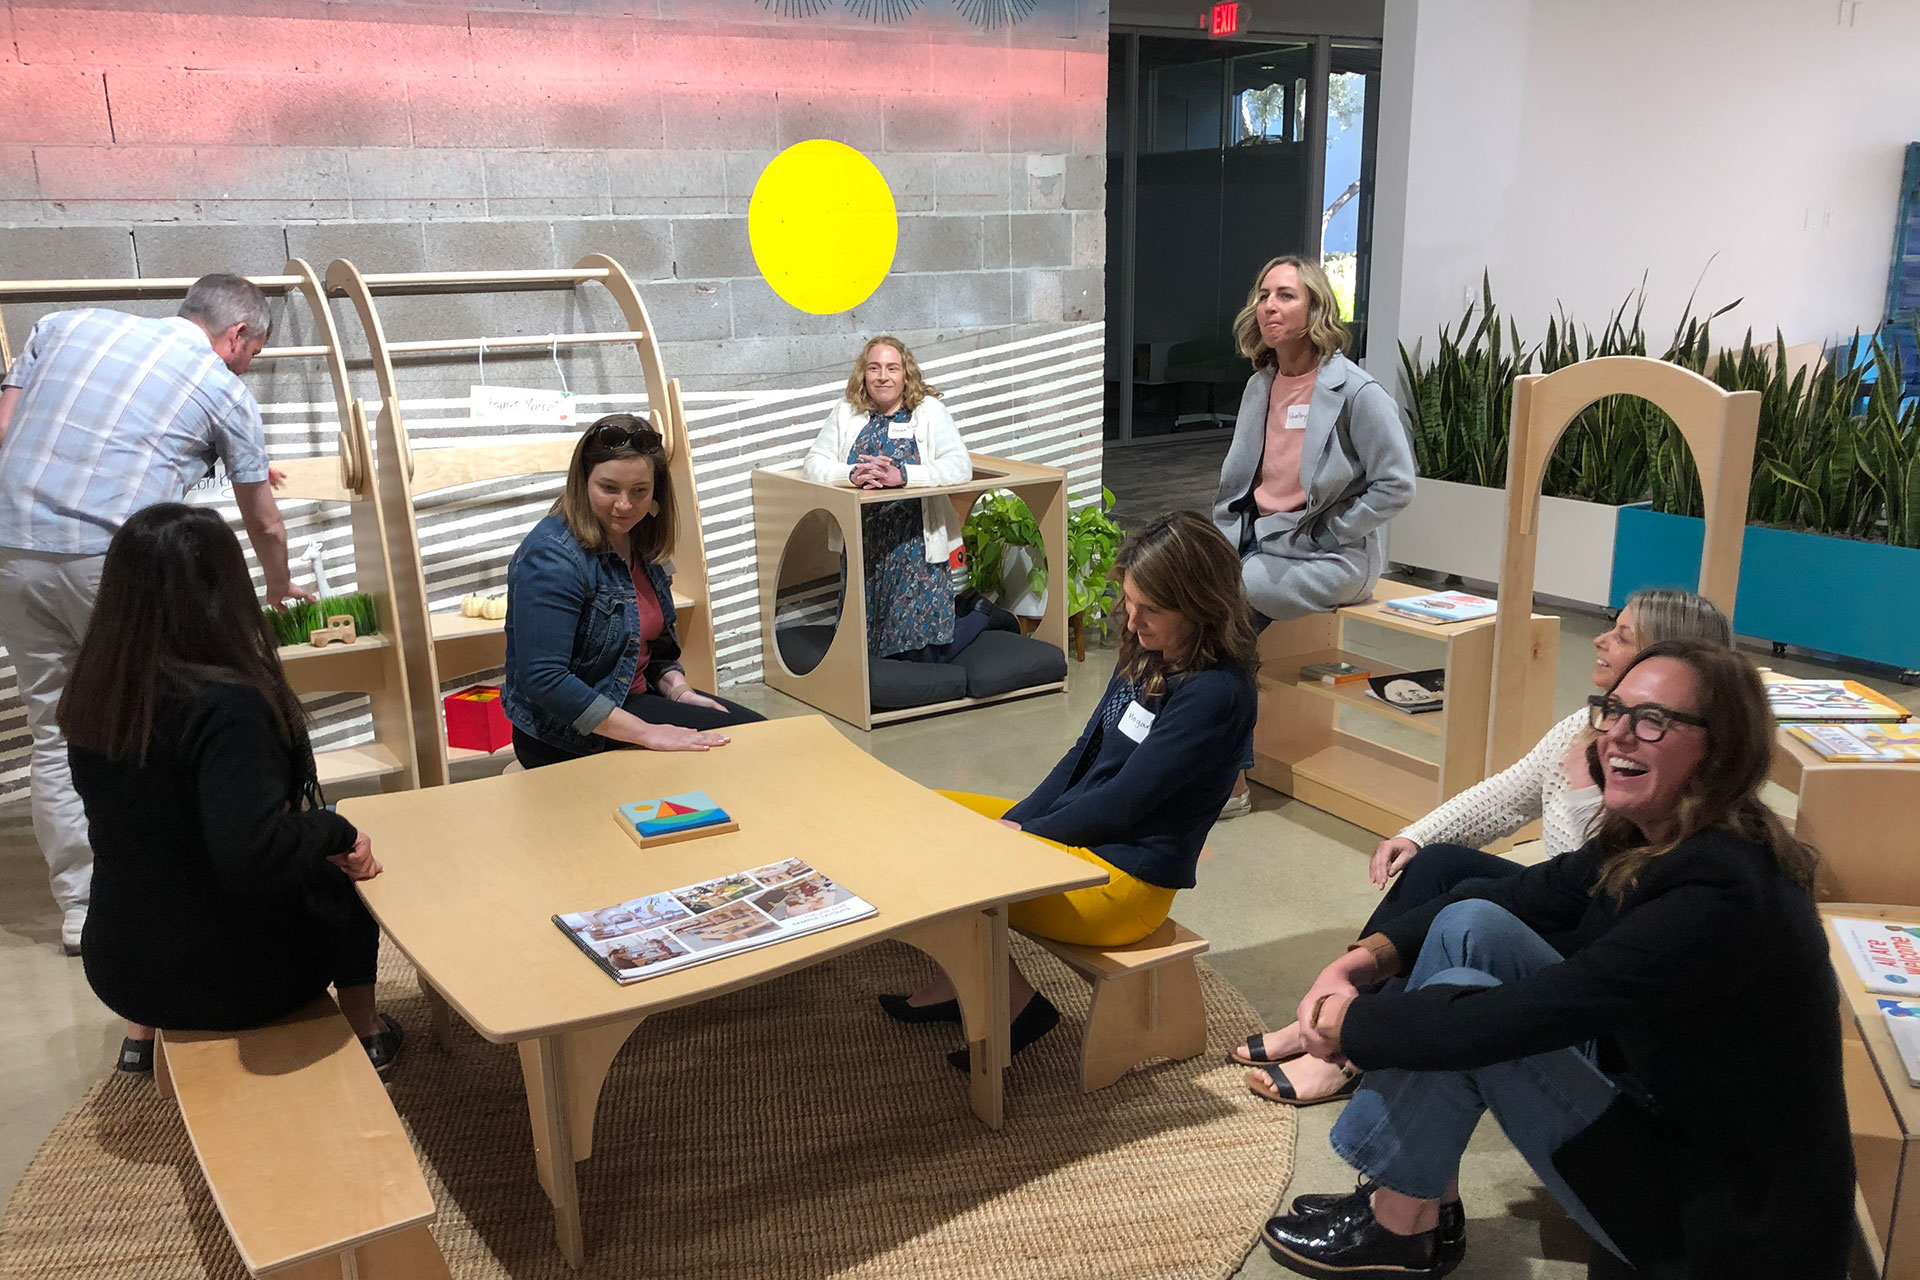 K-12 Education clients exploring Transitional Kindergarten furniture options at the One Workplace showroom in Oakland.